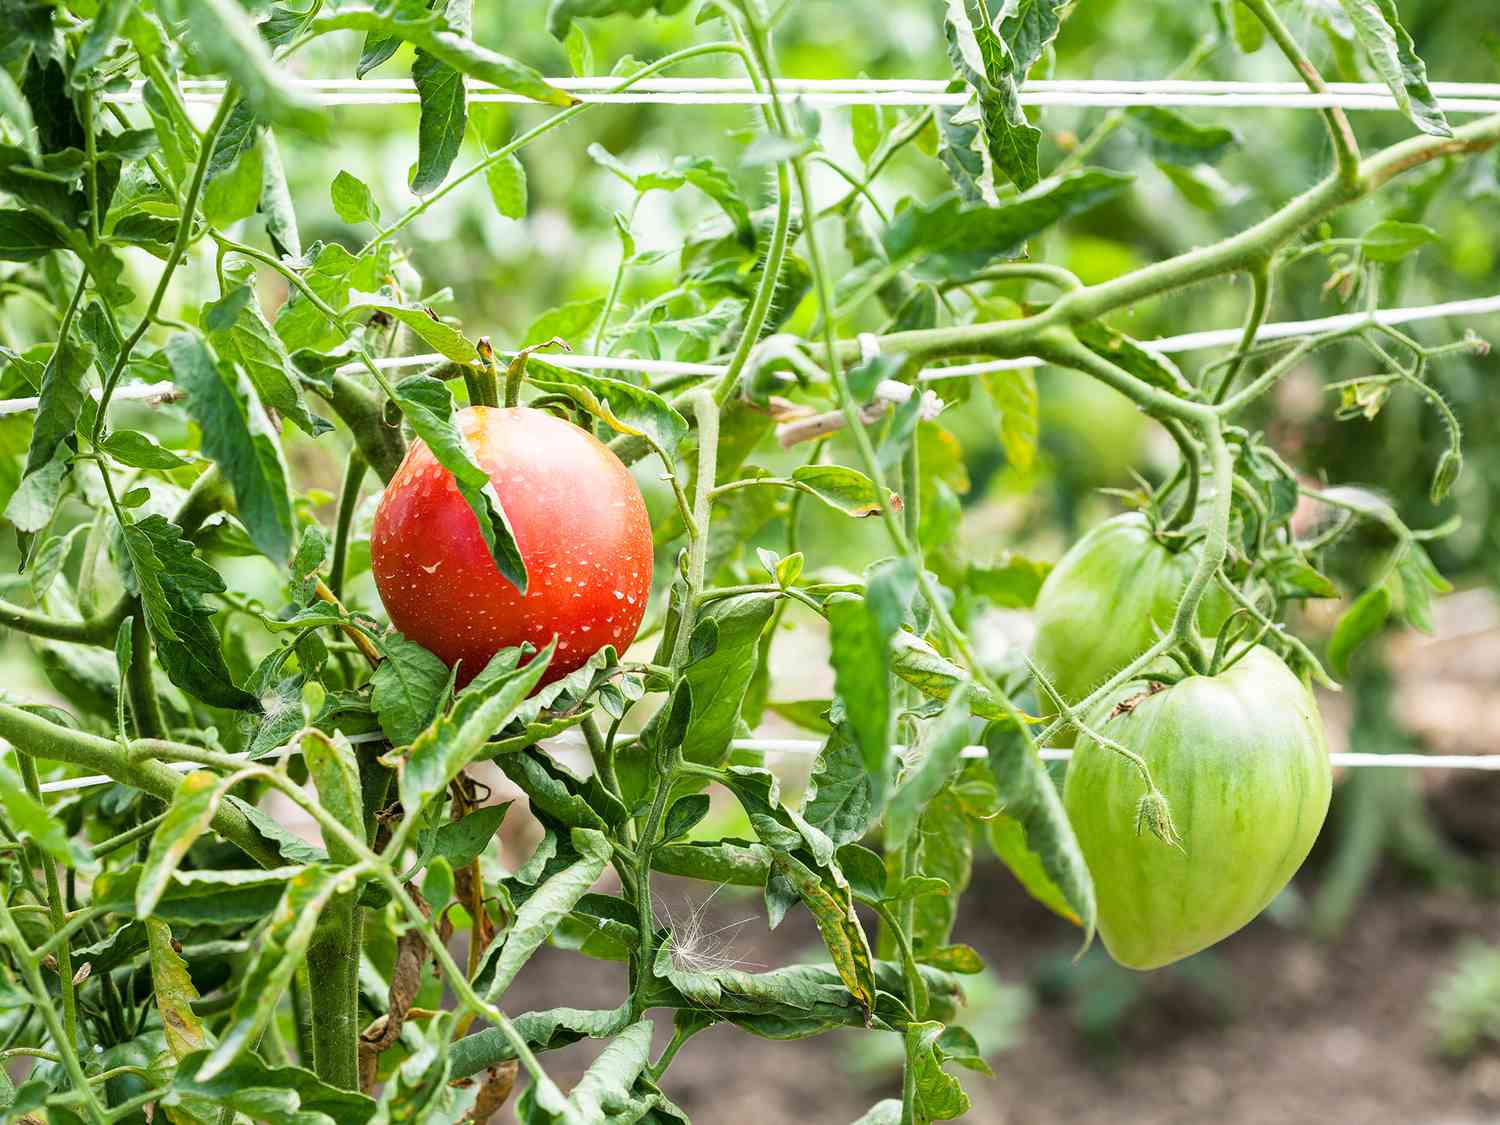 Enhance Your Gardening Experience: Learn About the Benefits of the Florida Weave System for Staking Tomatoes